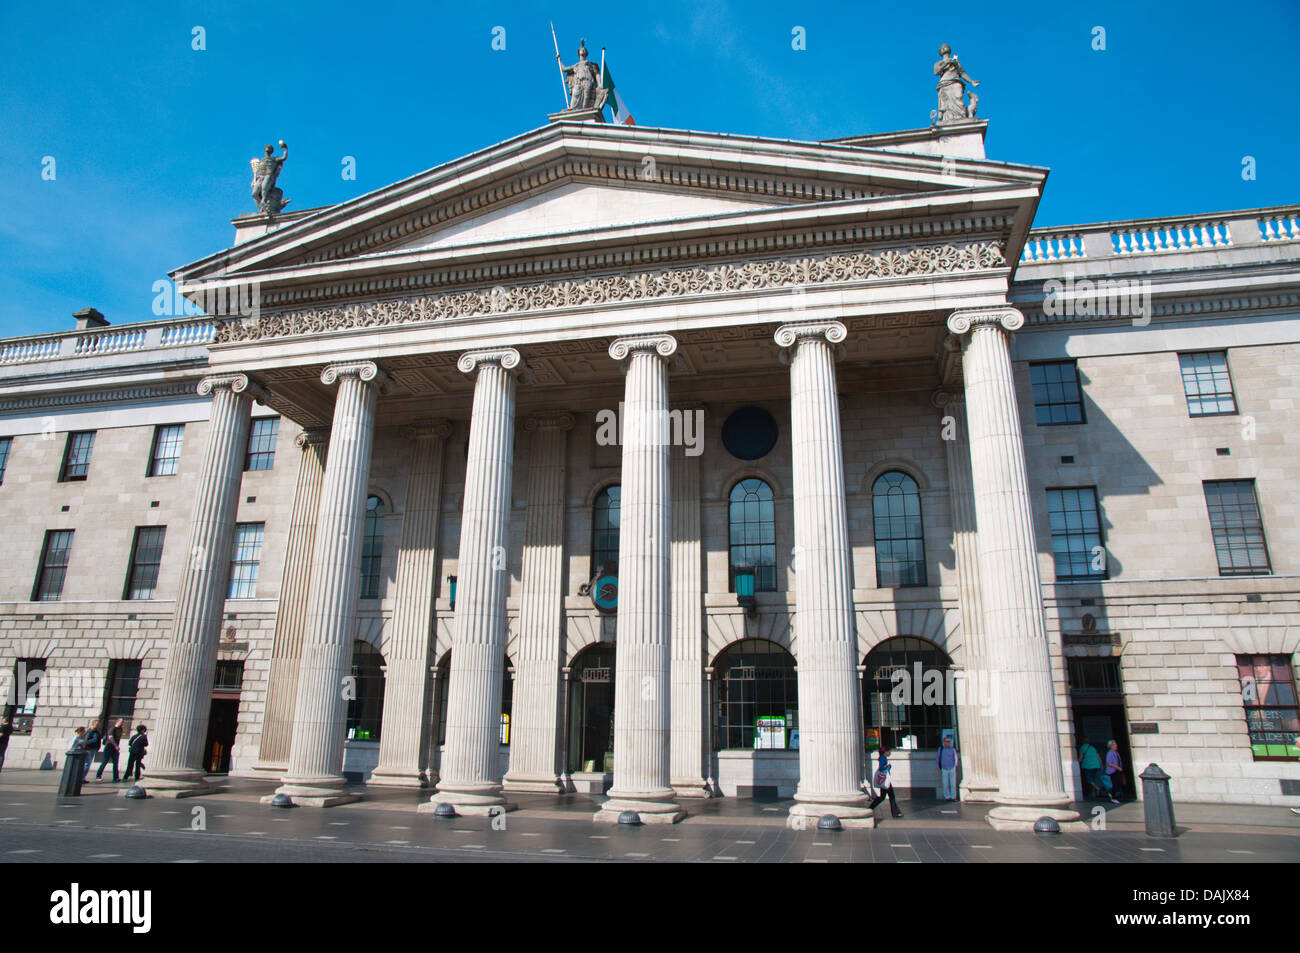 Le General Post Office building (1818) O'Connell Street Dublin Irlande Europe centrale Banque D'Images